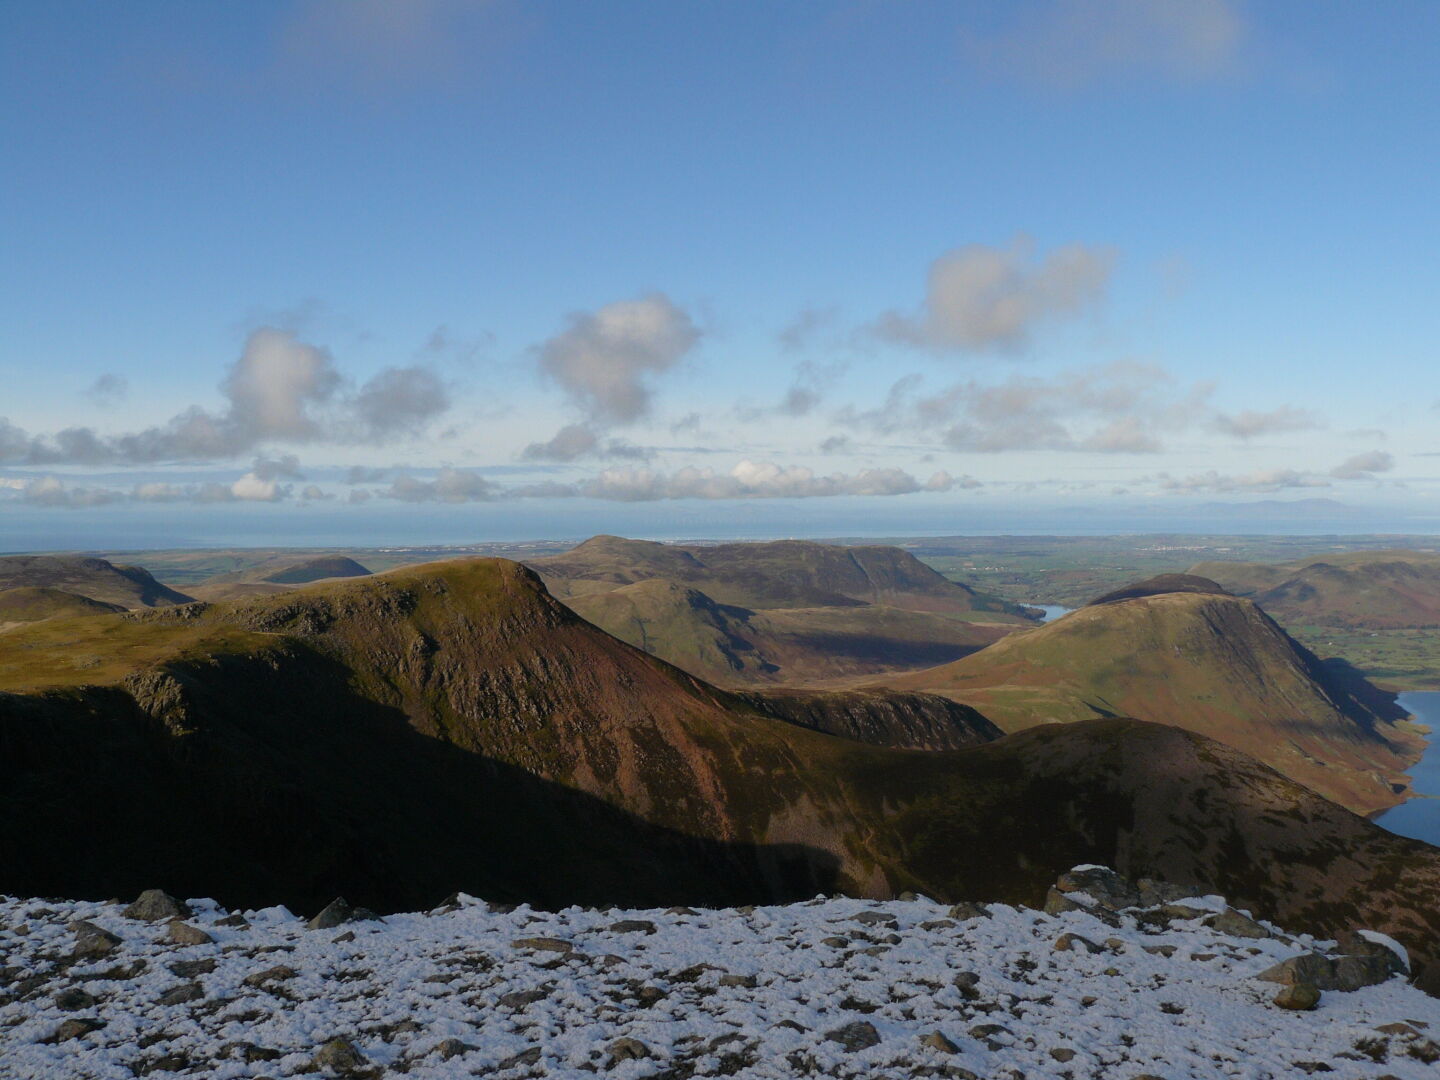 ... we had again a beautiful view over the Western Lake District...